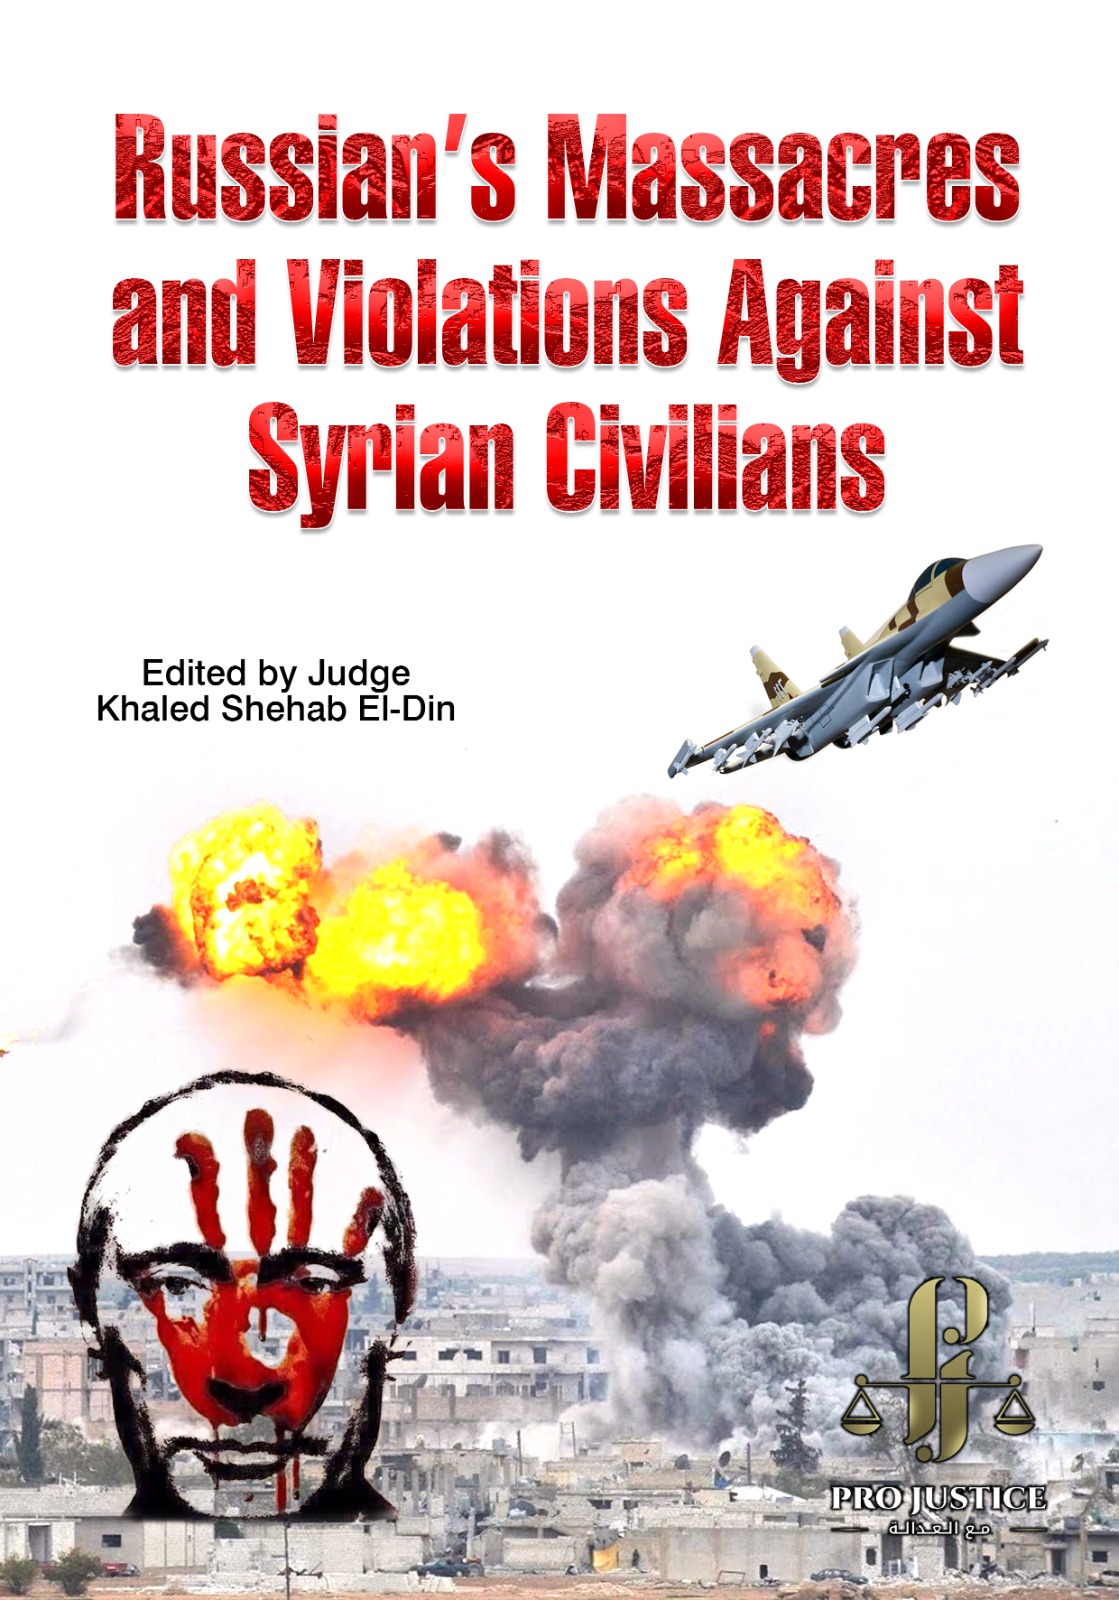 Pro-justice Launches Book on "Russian Massacres and Violations against Syrian Civilians"